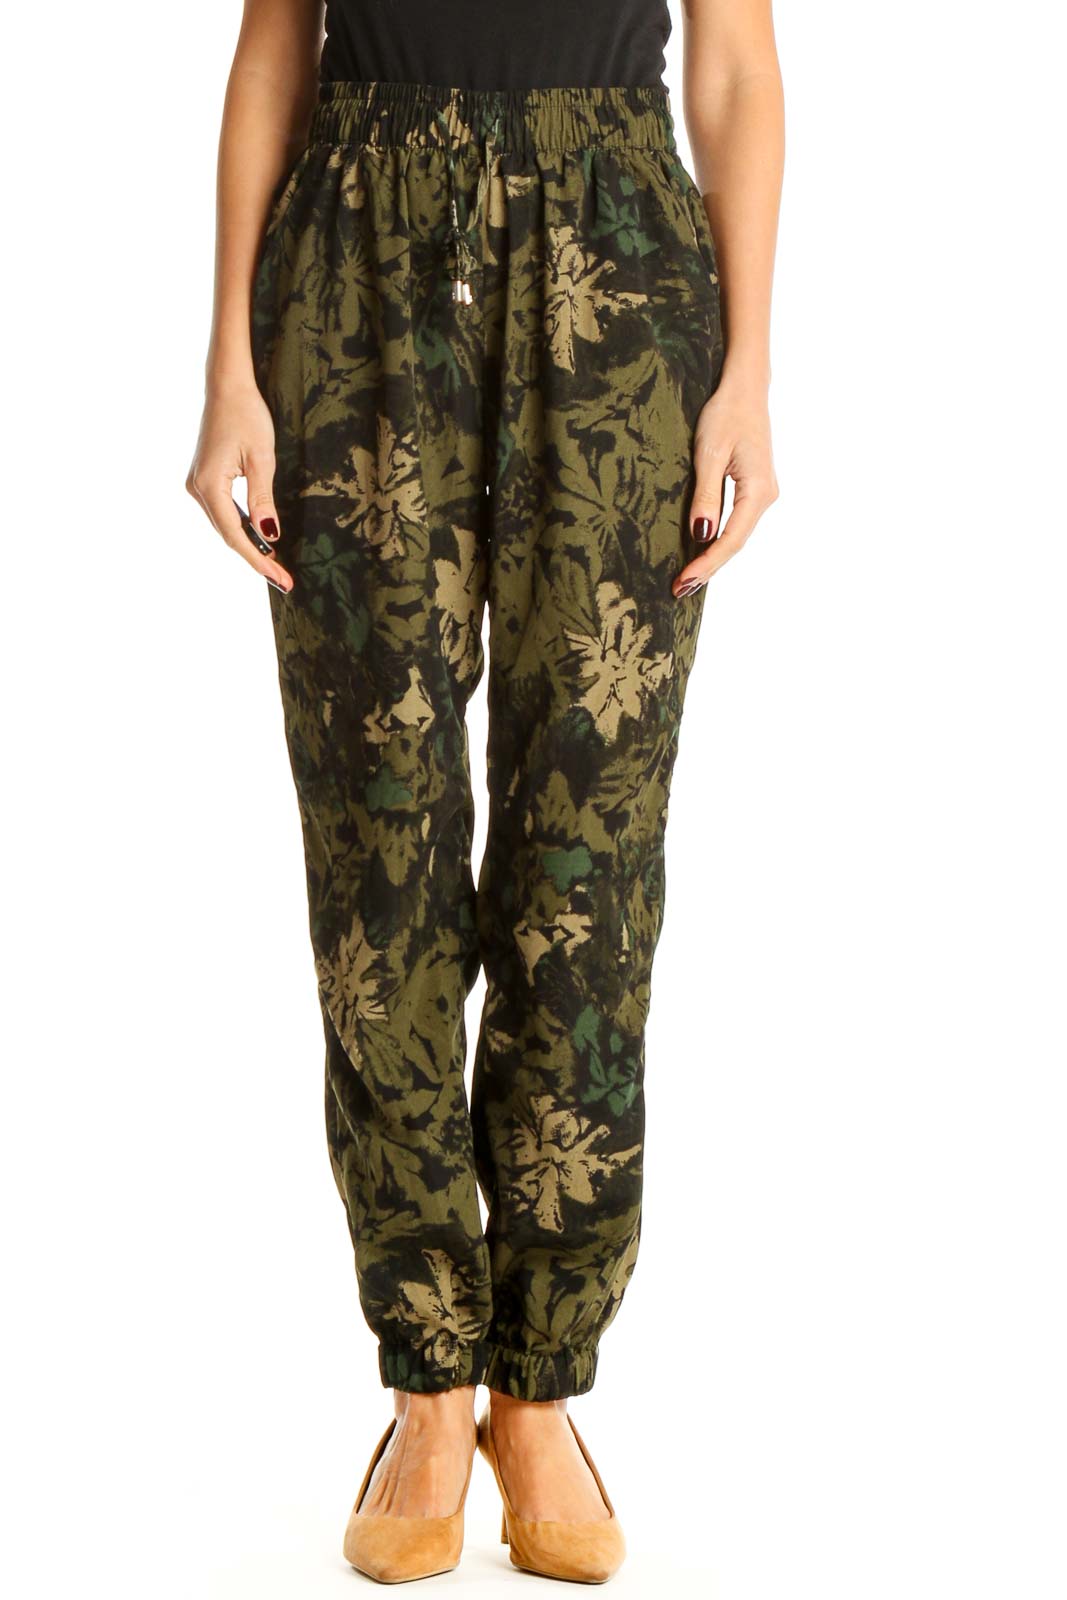 Black Printed Bohemian Trousers Front